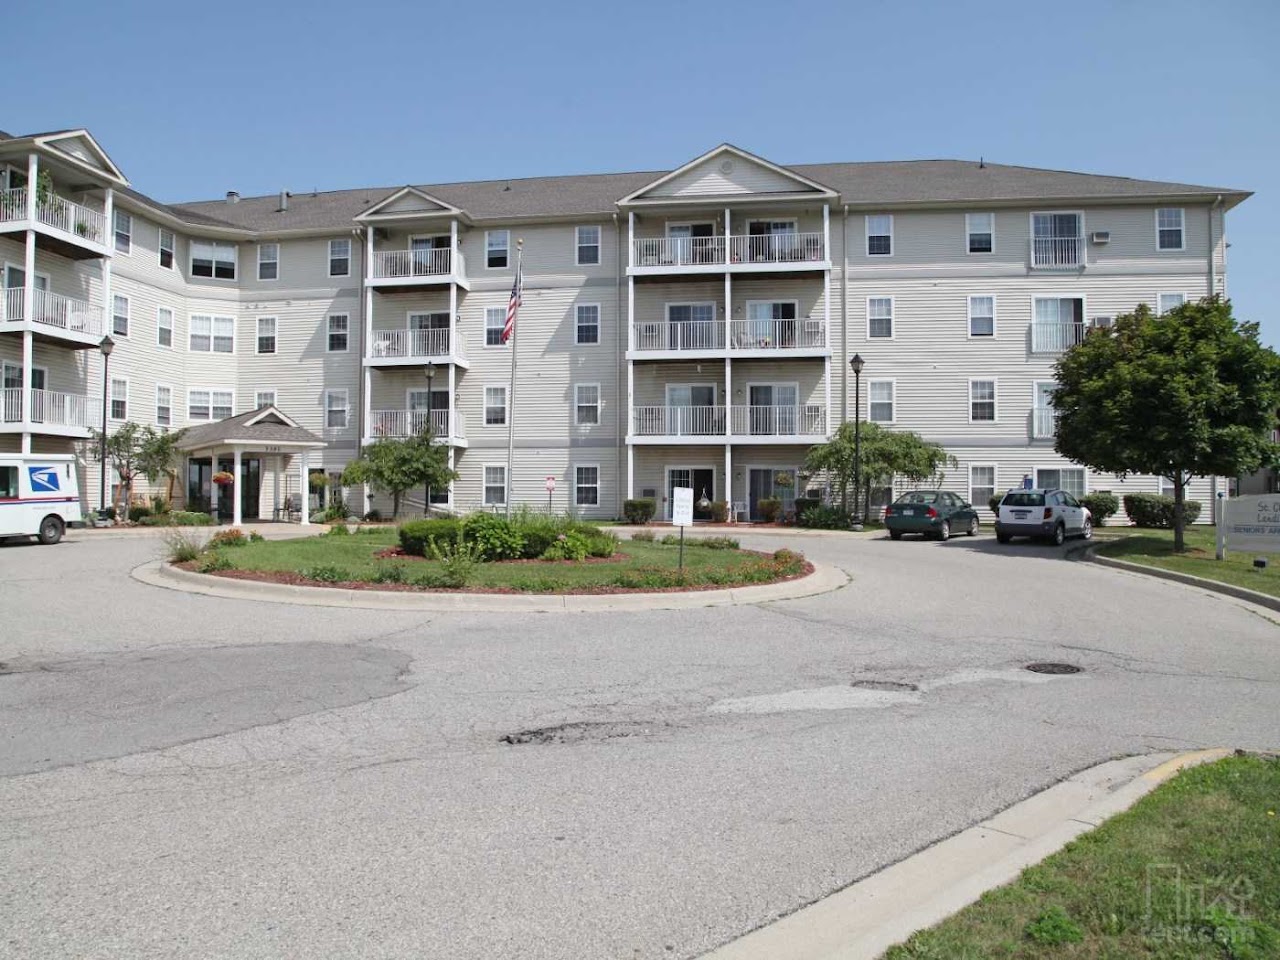 Photo of ARBORS AT ST CLAIR APTS. Affordable housing located at 3195 MILITARY ST PORT HURON, MI 48060